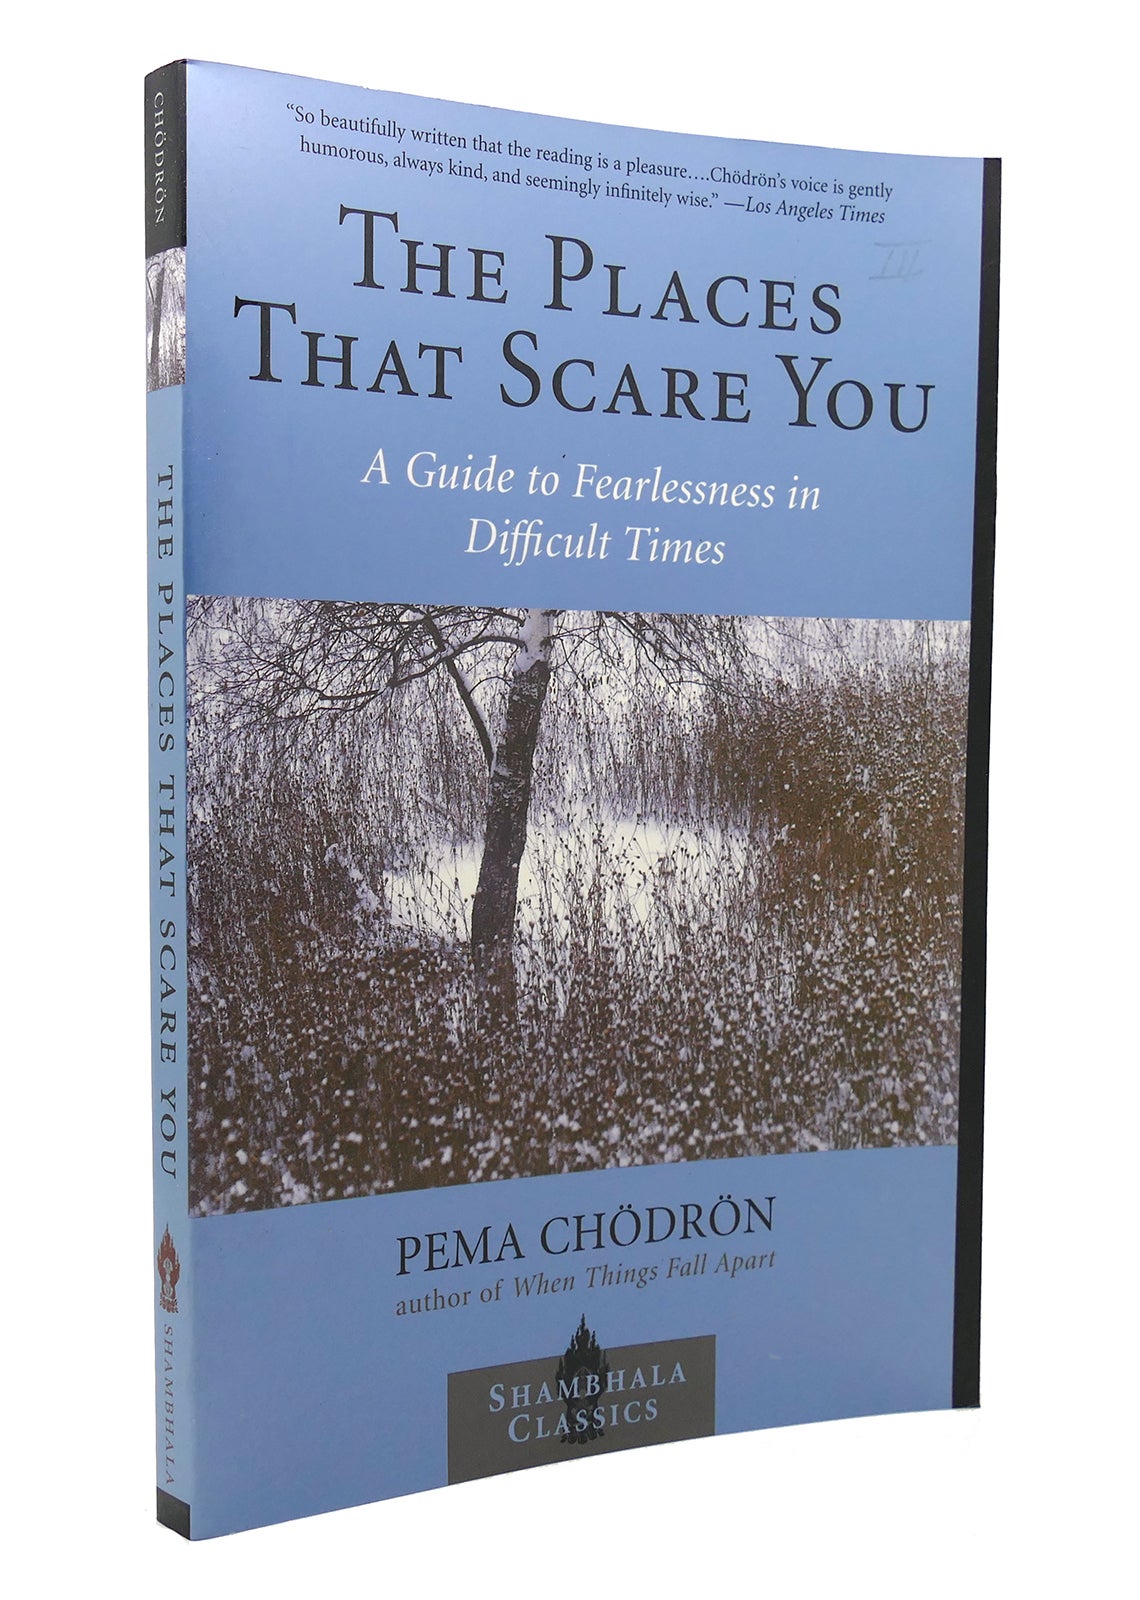 THE PLACES THAT SCARE YOU A Guide to Fearlessness in Difficult Times  Shambhala Classics by Pema Chodron on Rare Book Cellar